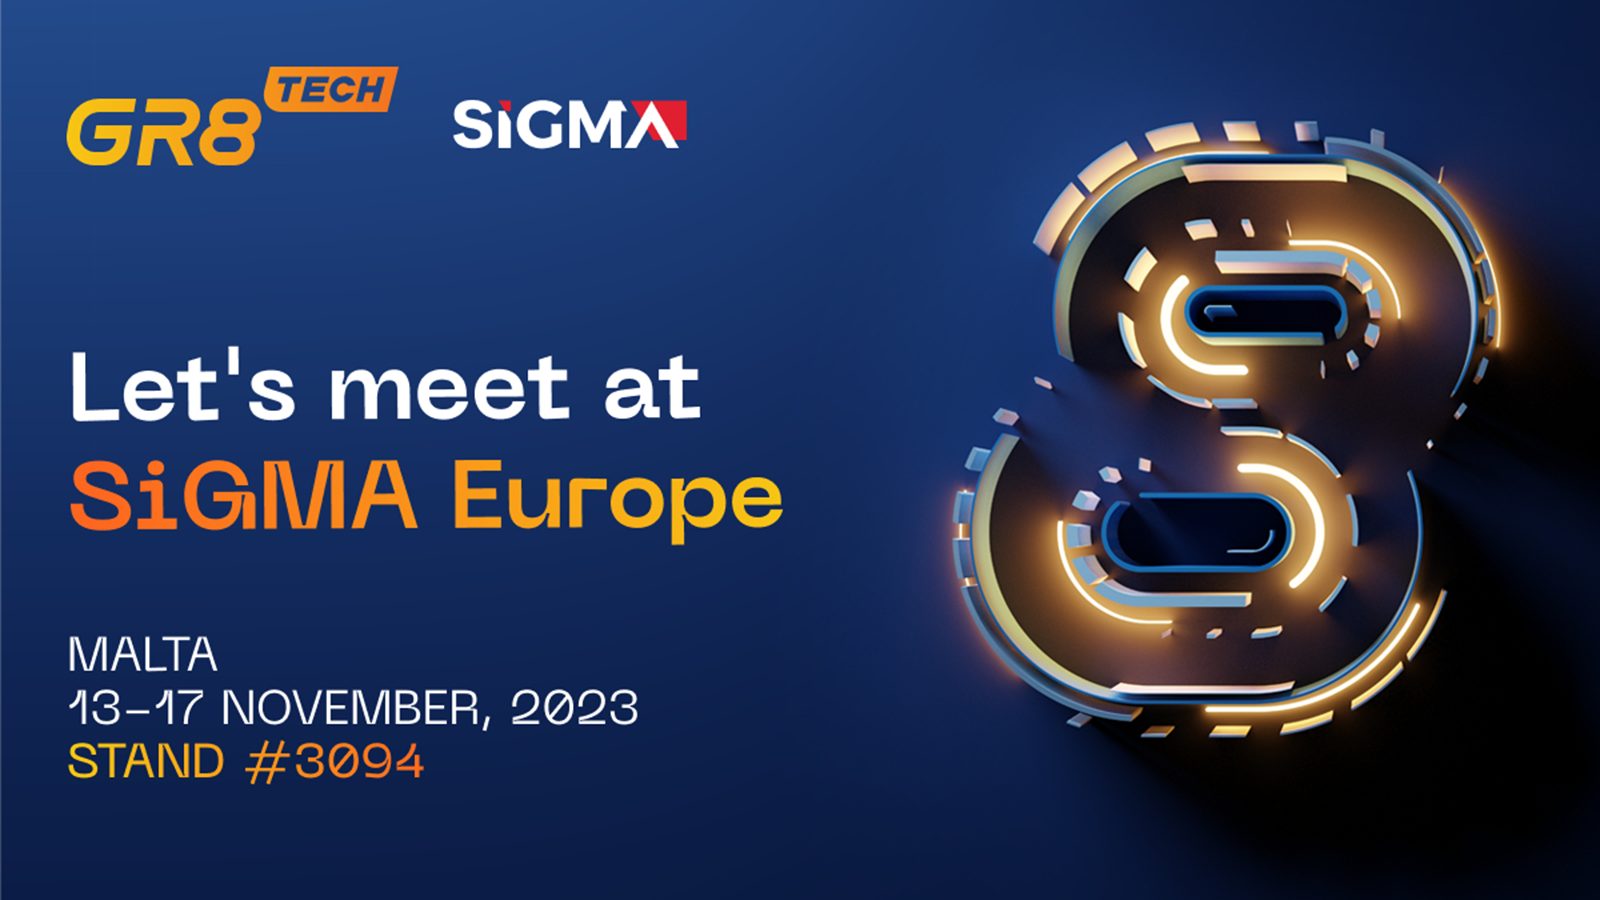 GR8 Tech Gears Up for SiGMA Europe 2023